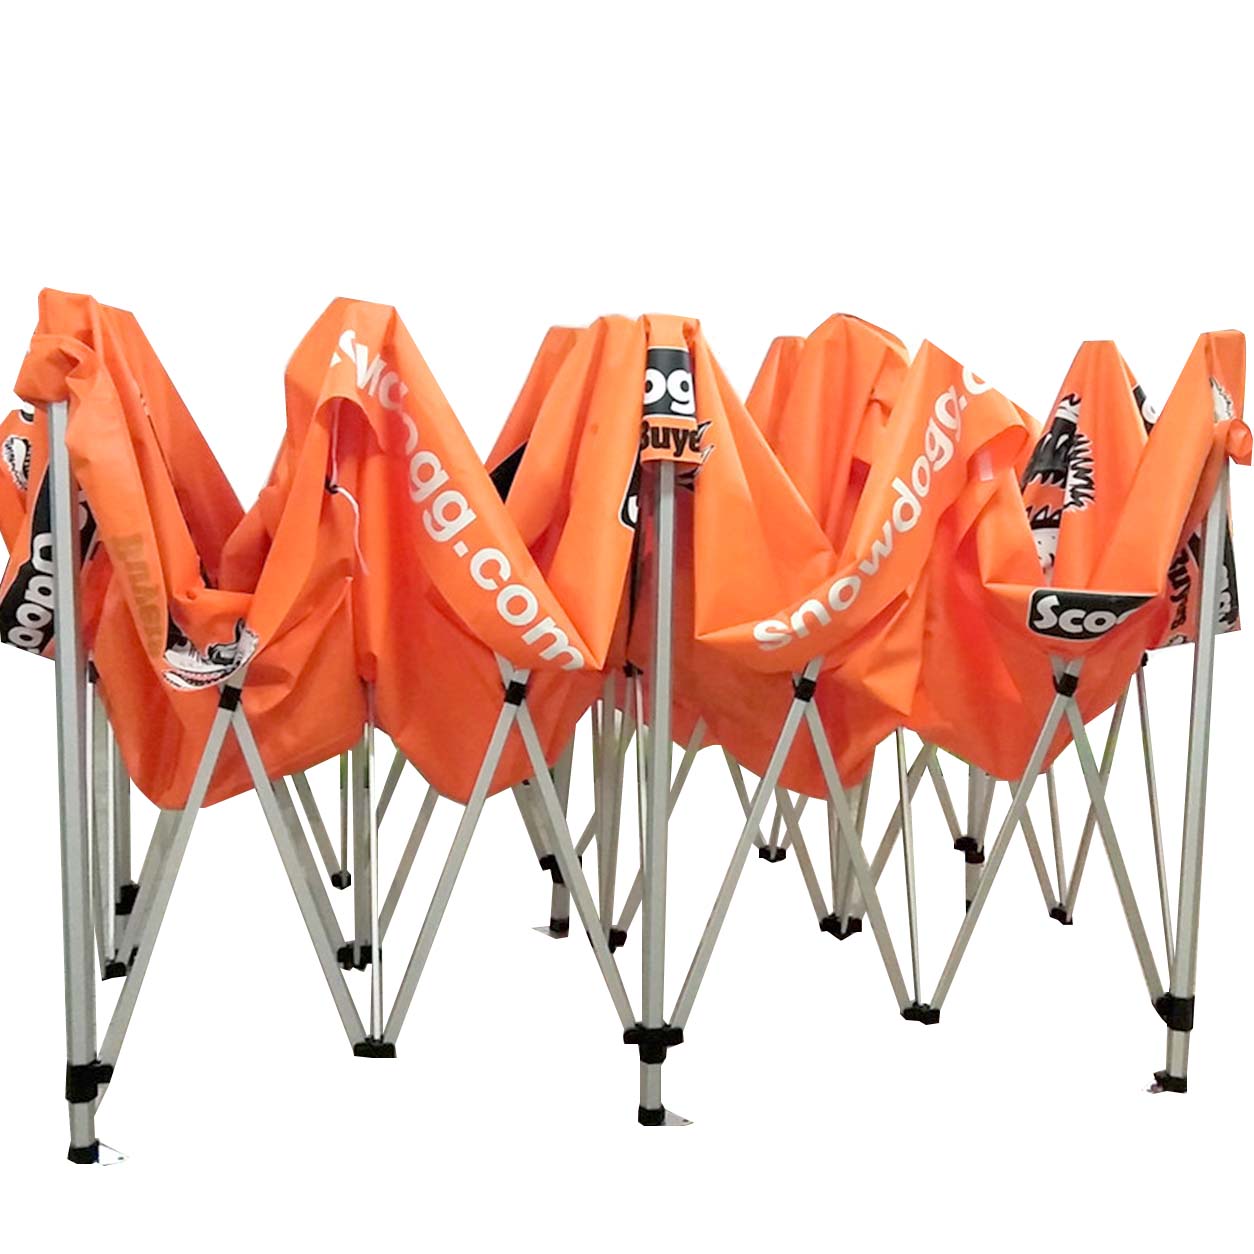 FeaMont affirmative folding canopy certifications for outdoor activities-2